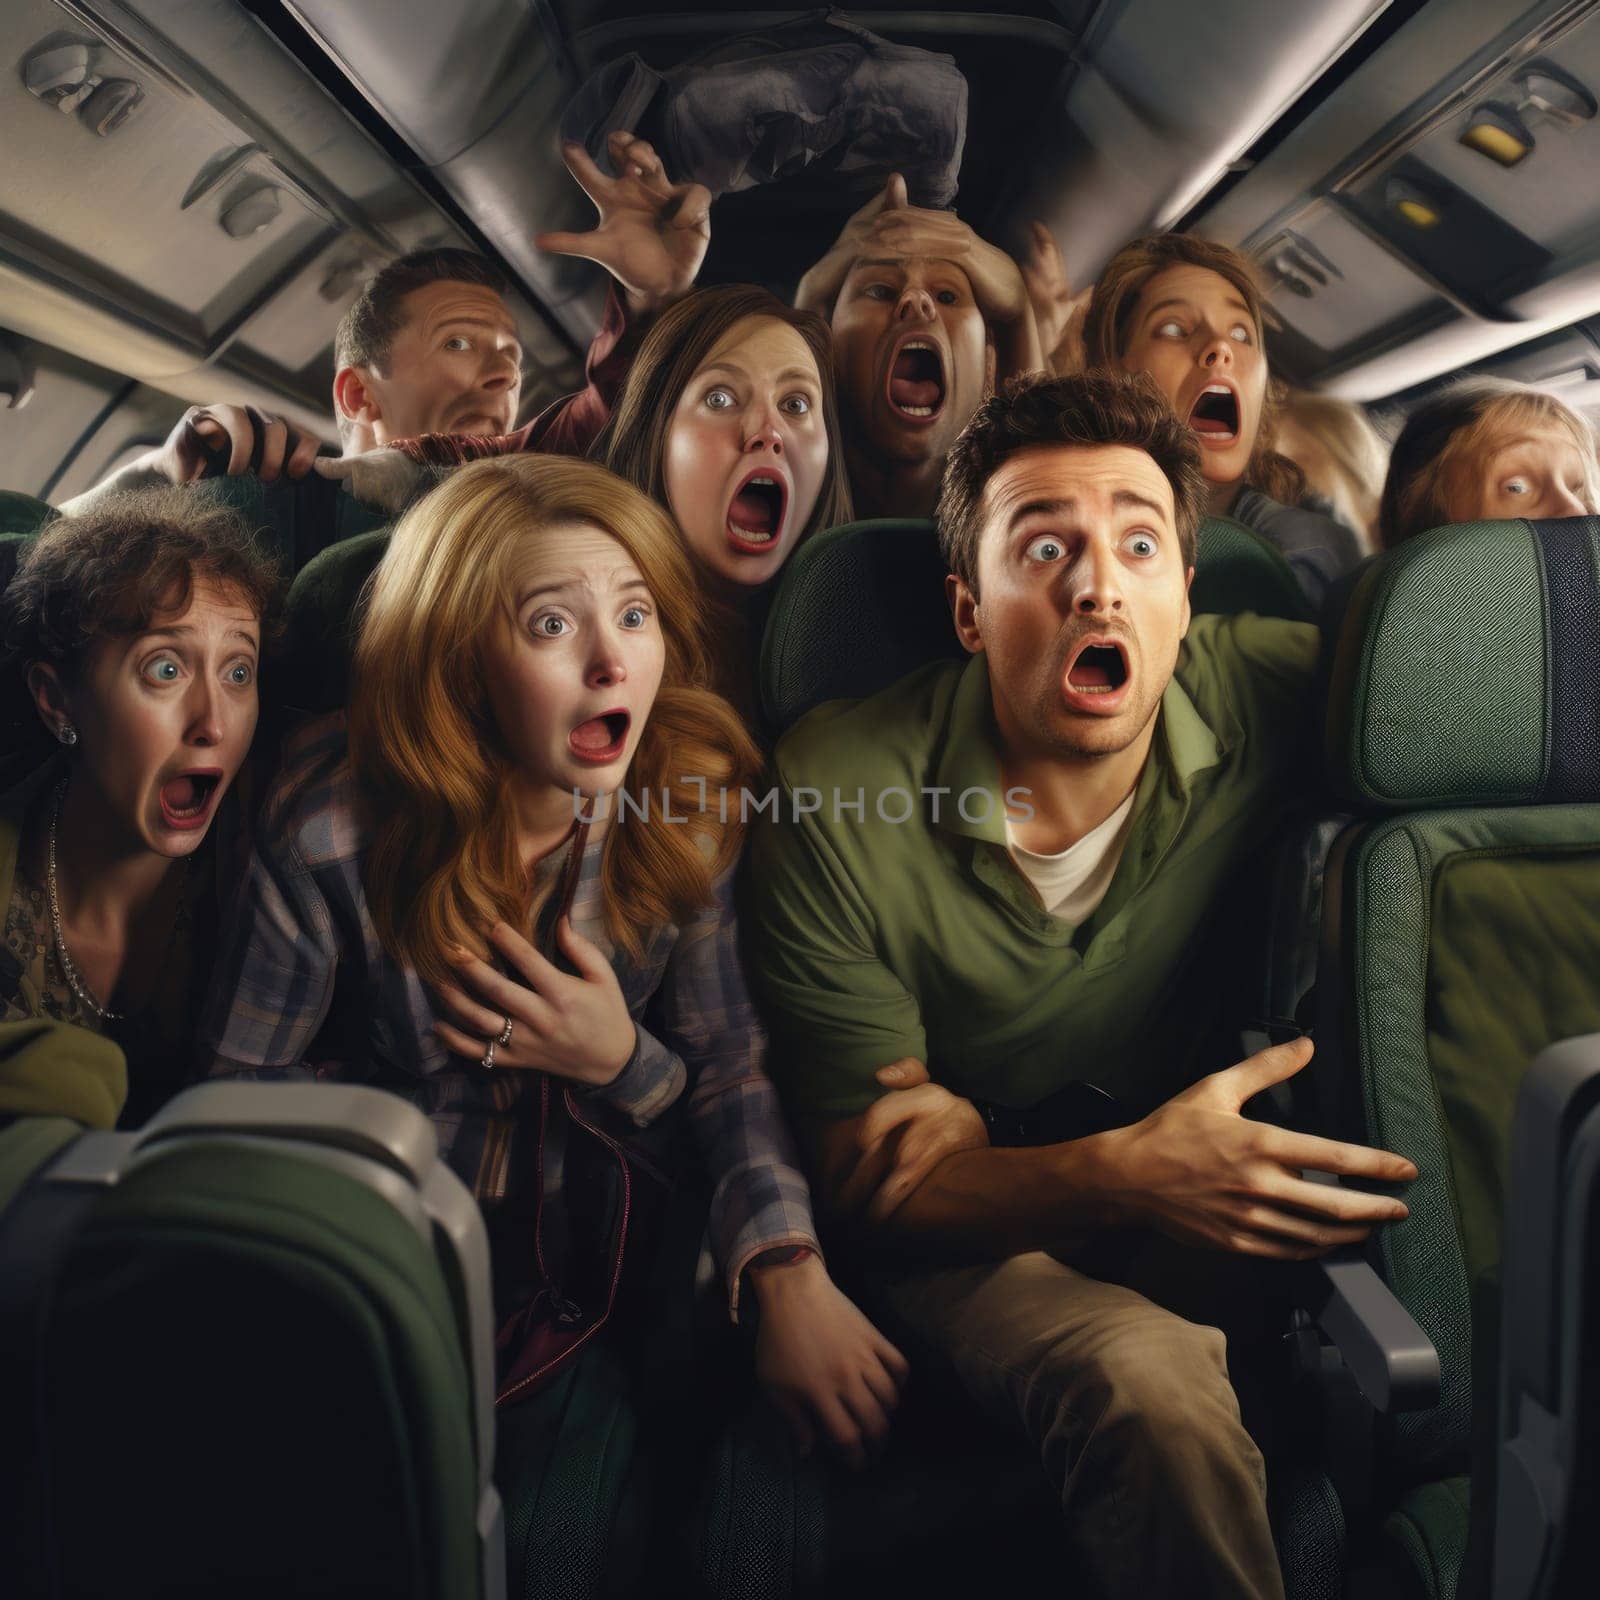 A group of people on an airplane, mouths open, reacting to a serious situation or emergency on the plane.